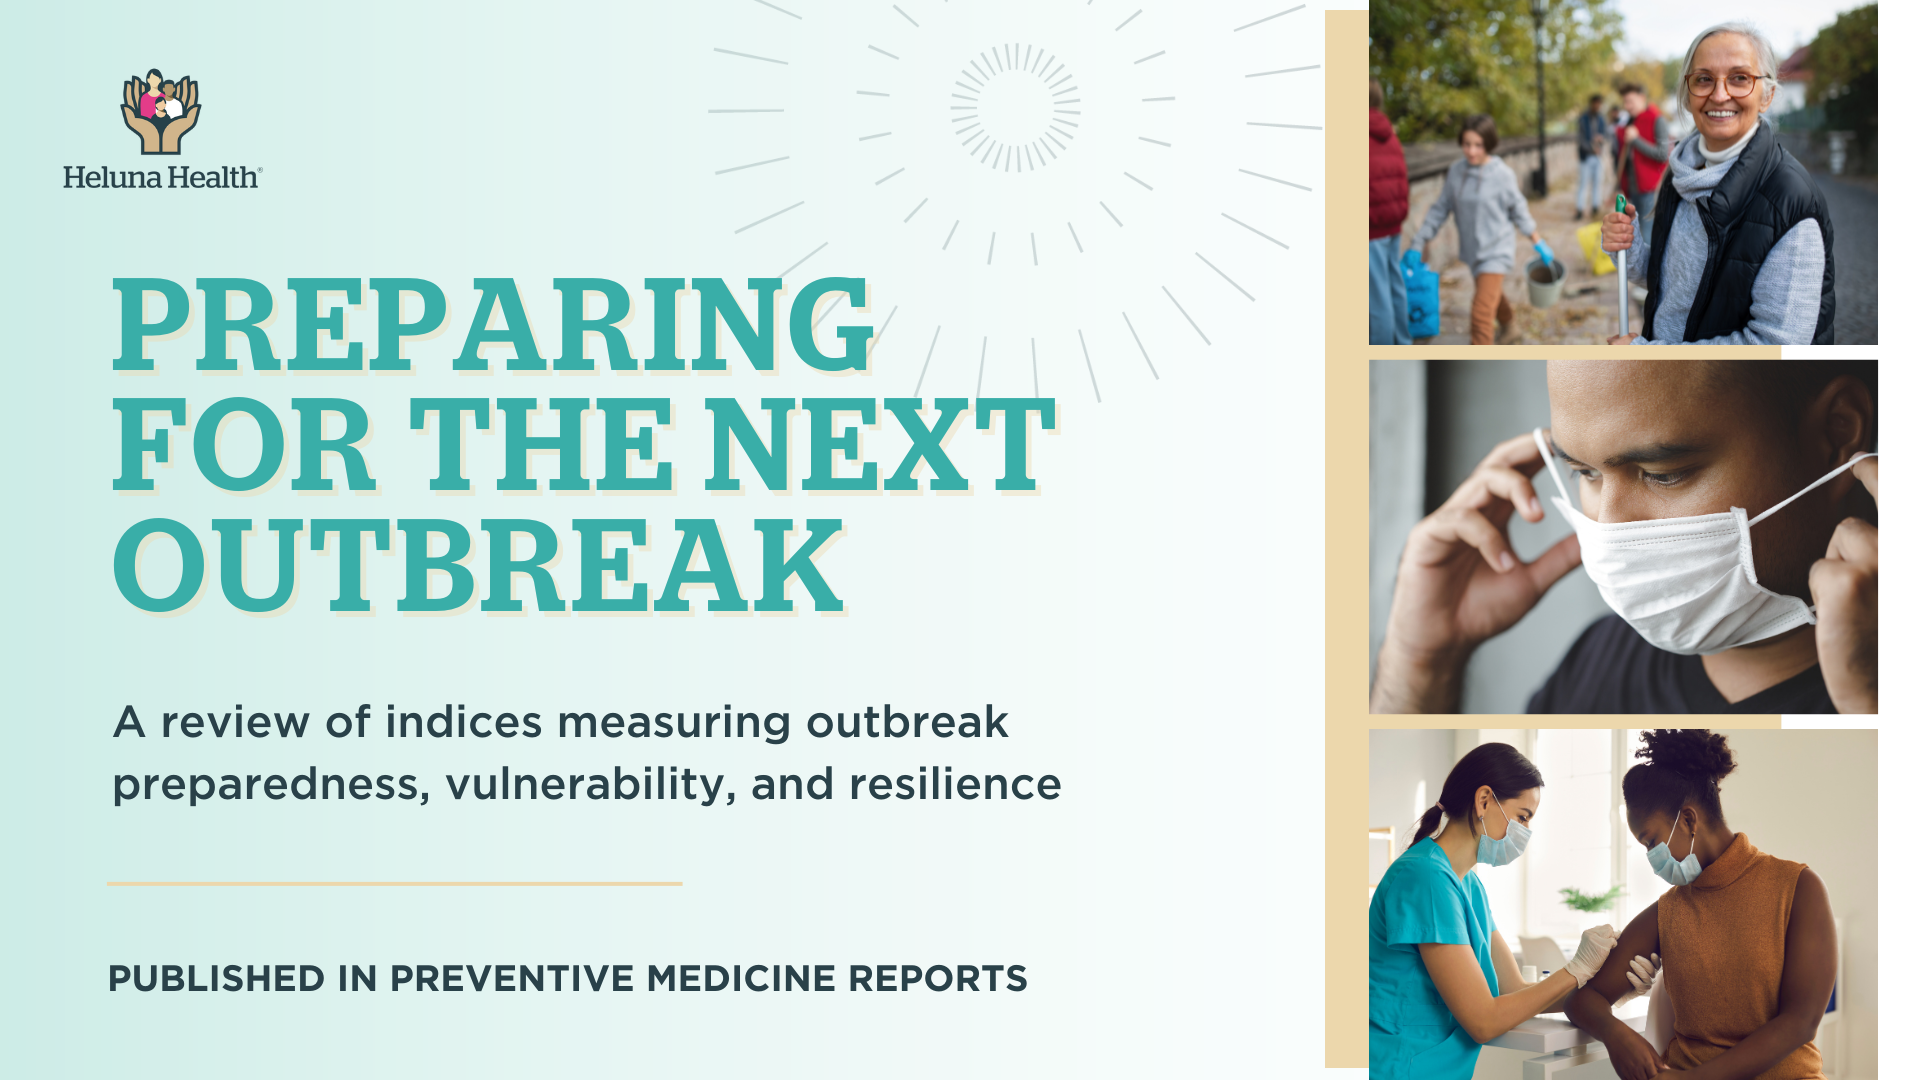 Researchers Publish Review of Outbreak Preparedness Tools